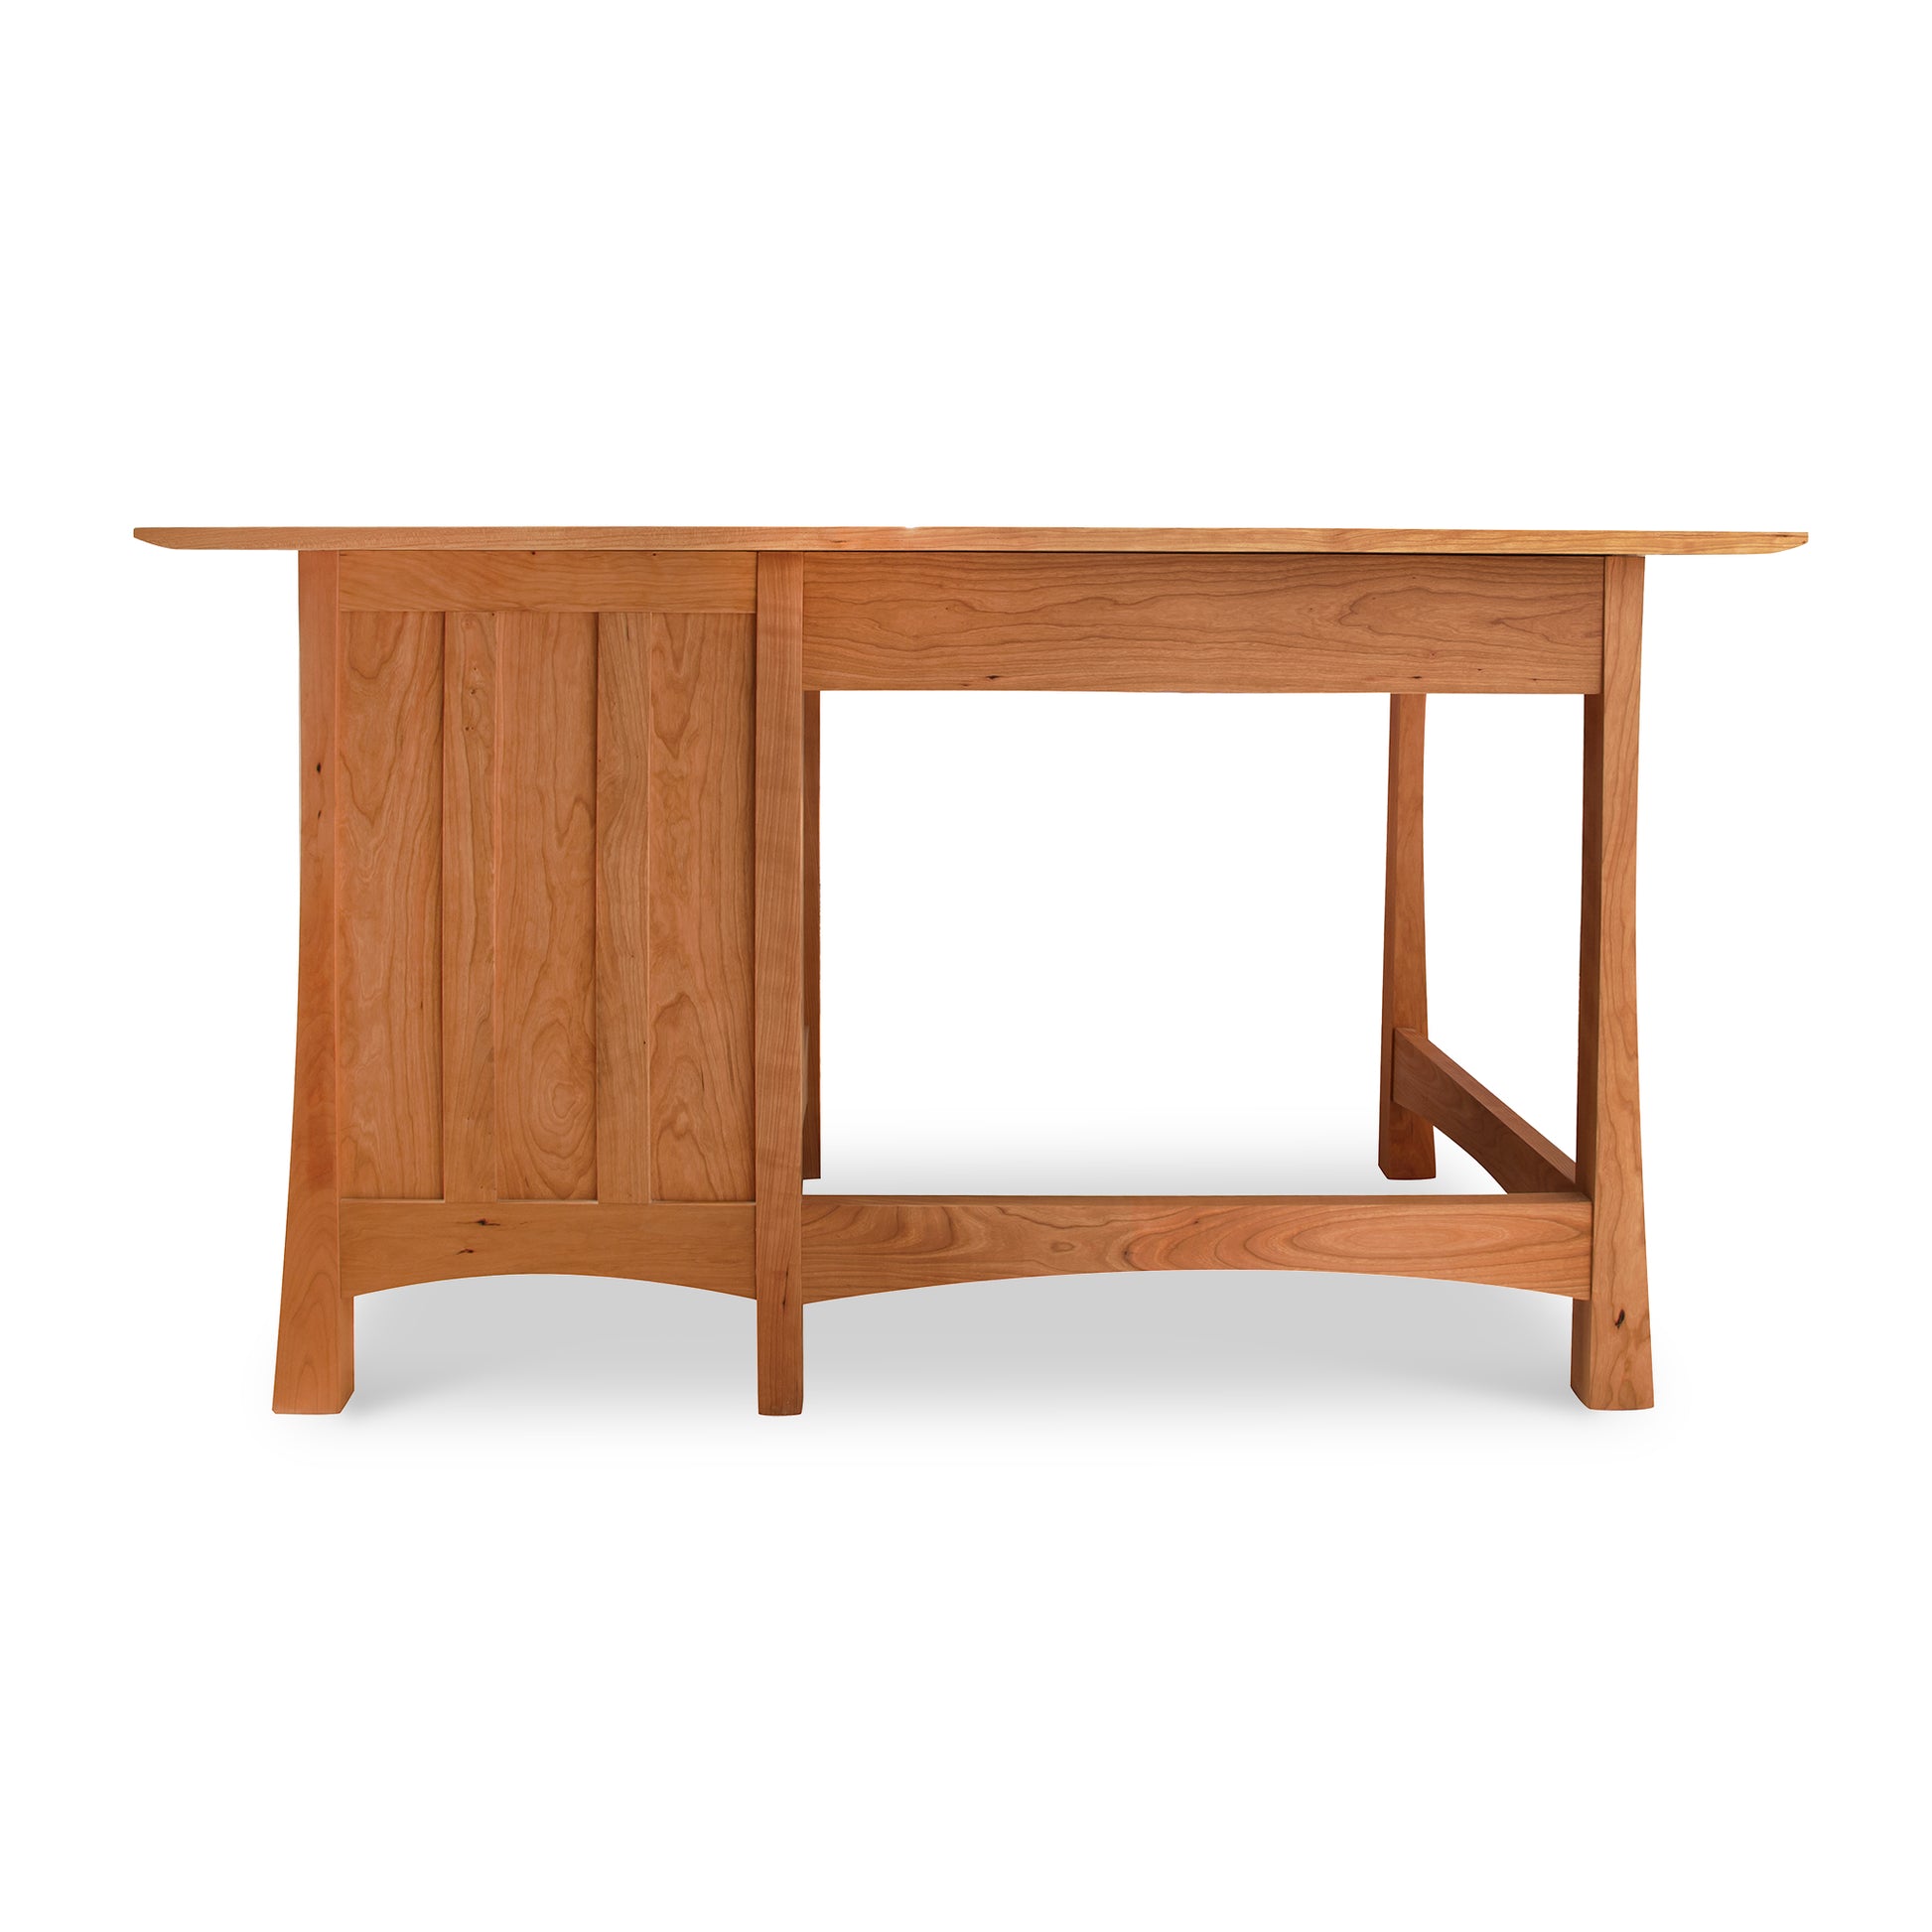 A Vermont Furniture Designs Contemporary Craftsman Study Desk with a solid wood top and drawers, featuring a contemporary craftsman design.